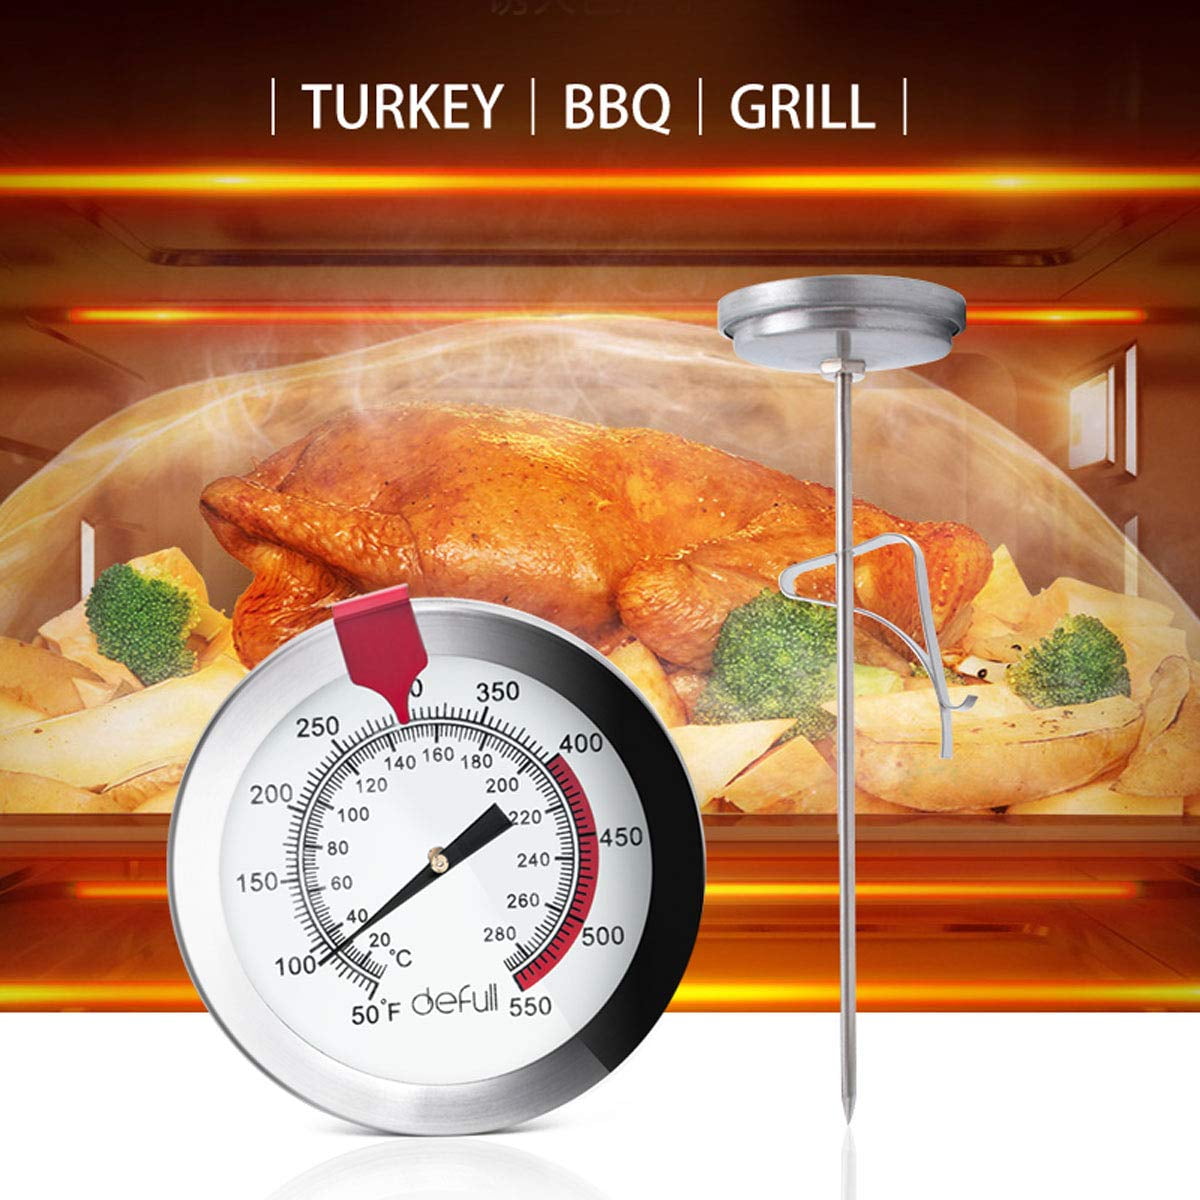 Lightbeam 16 Long Stem Deep Fry Thermometer with Clamp, Instant Read 2 Dial Meat BBQ Thermometer for Deep Fry, Grill, Turkey, Candy, Coffee Etc